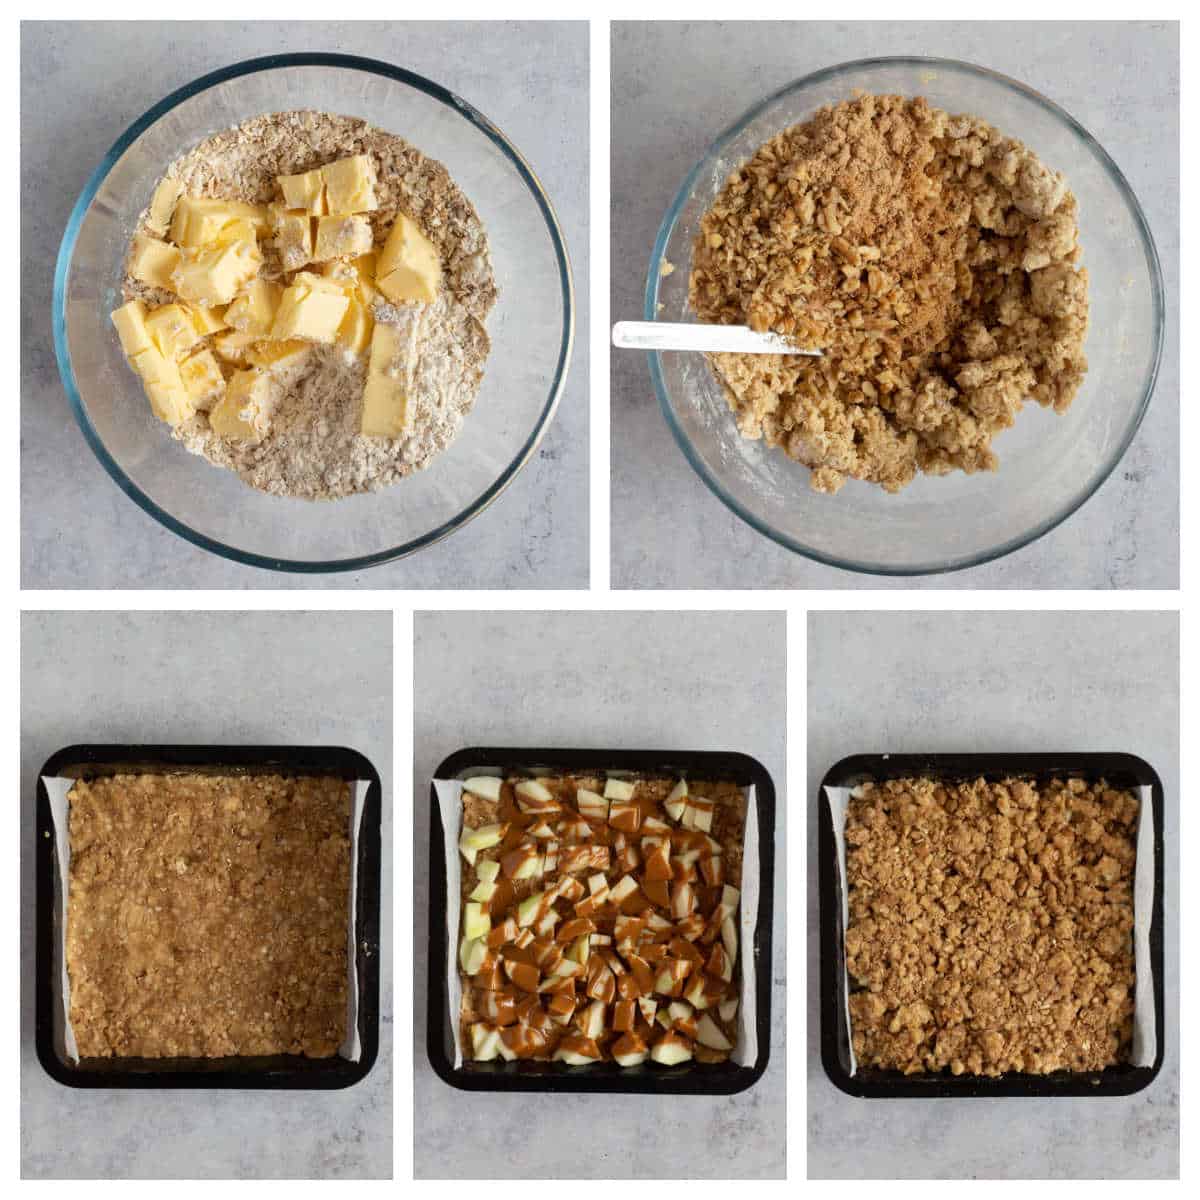 Step by step photo instruction collage for making the Biscoff apple crumble bars.